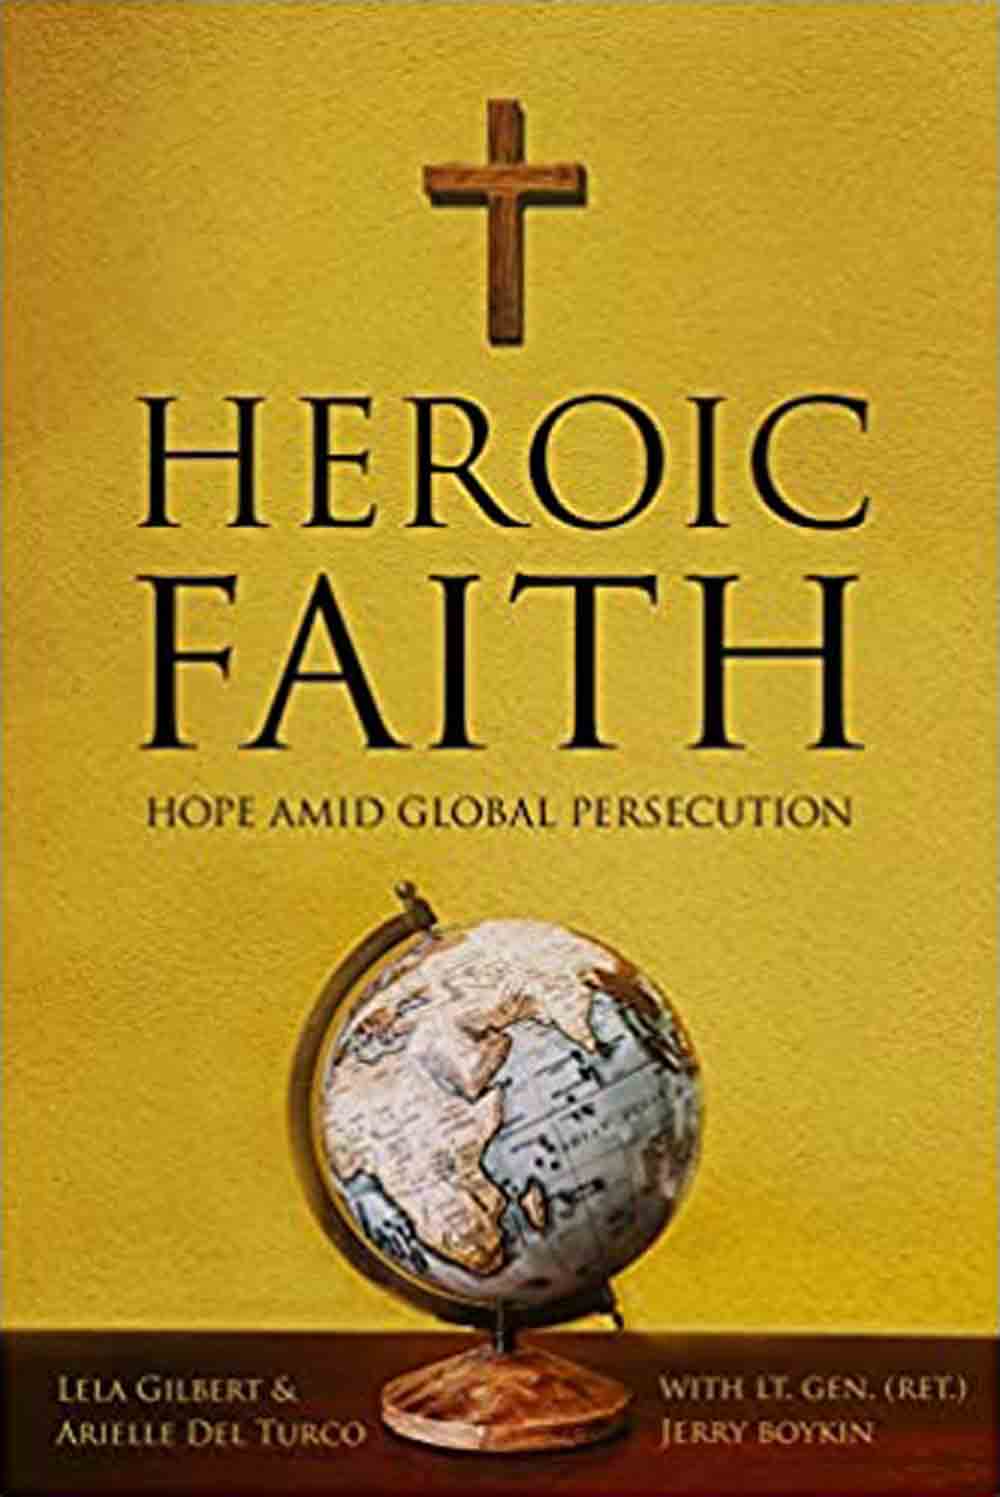 Religious Freedom at Risk, Heroic Faith Sheds Light on Increasing Threats to the Devoted